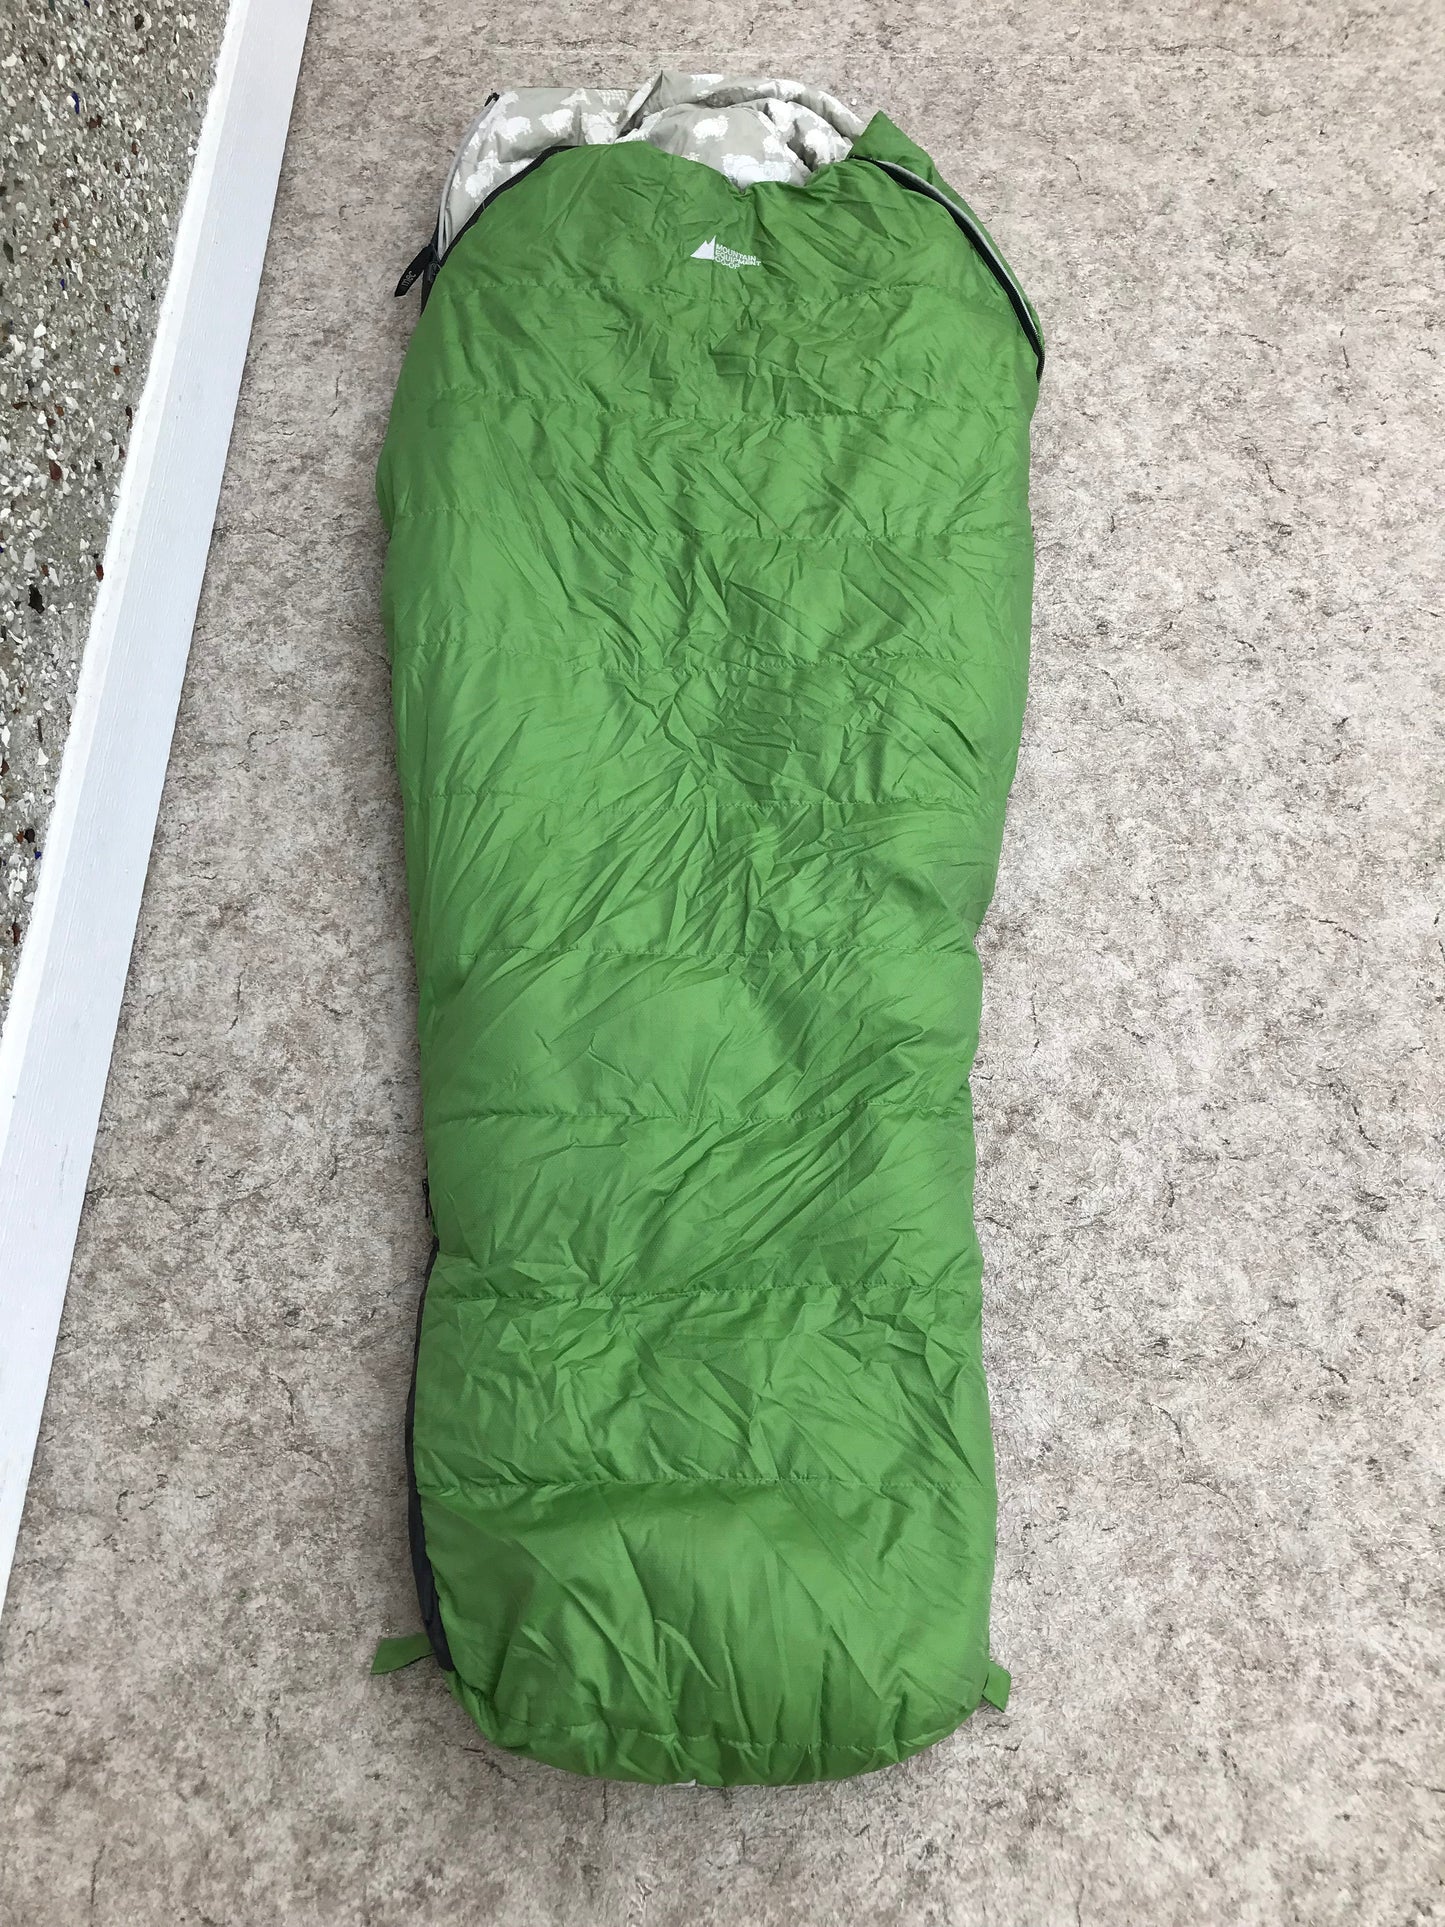 Camping Adventures MEC Explorer Child Youth DOWN Filled Sleeping Bag o Celsius As New Up To 4.6 Ft Buit In Pillow Seals Heat in Cold Out As New